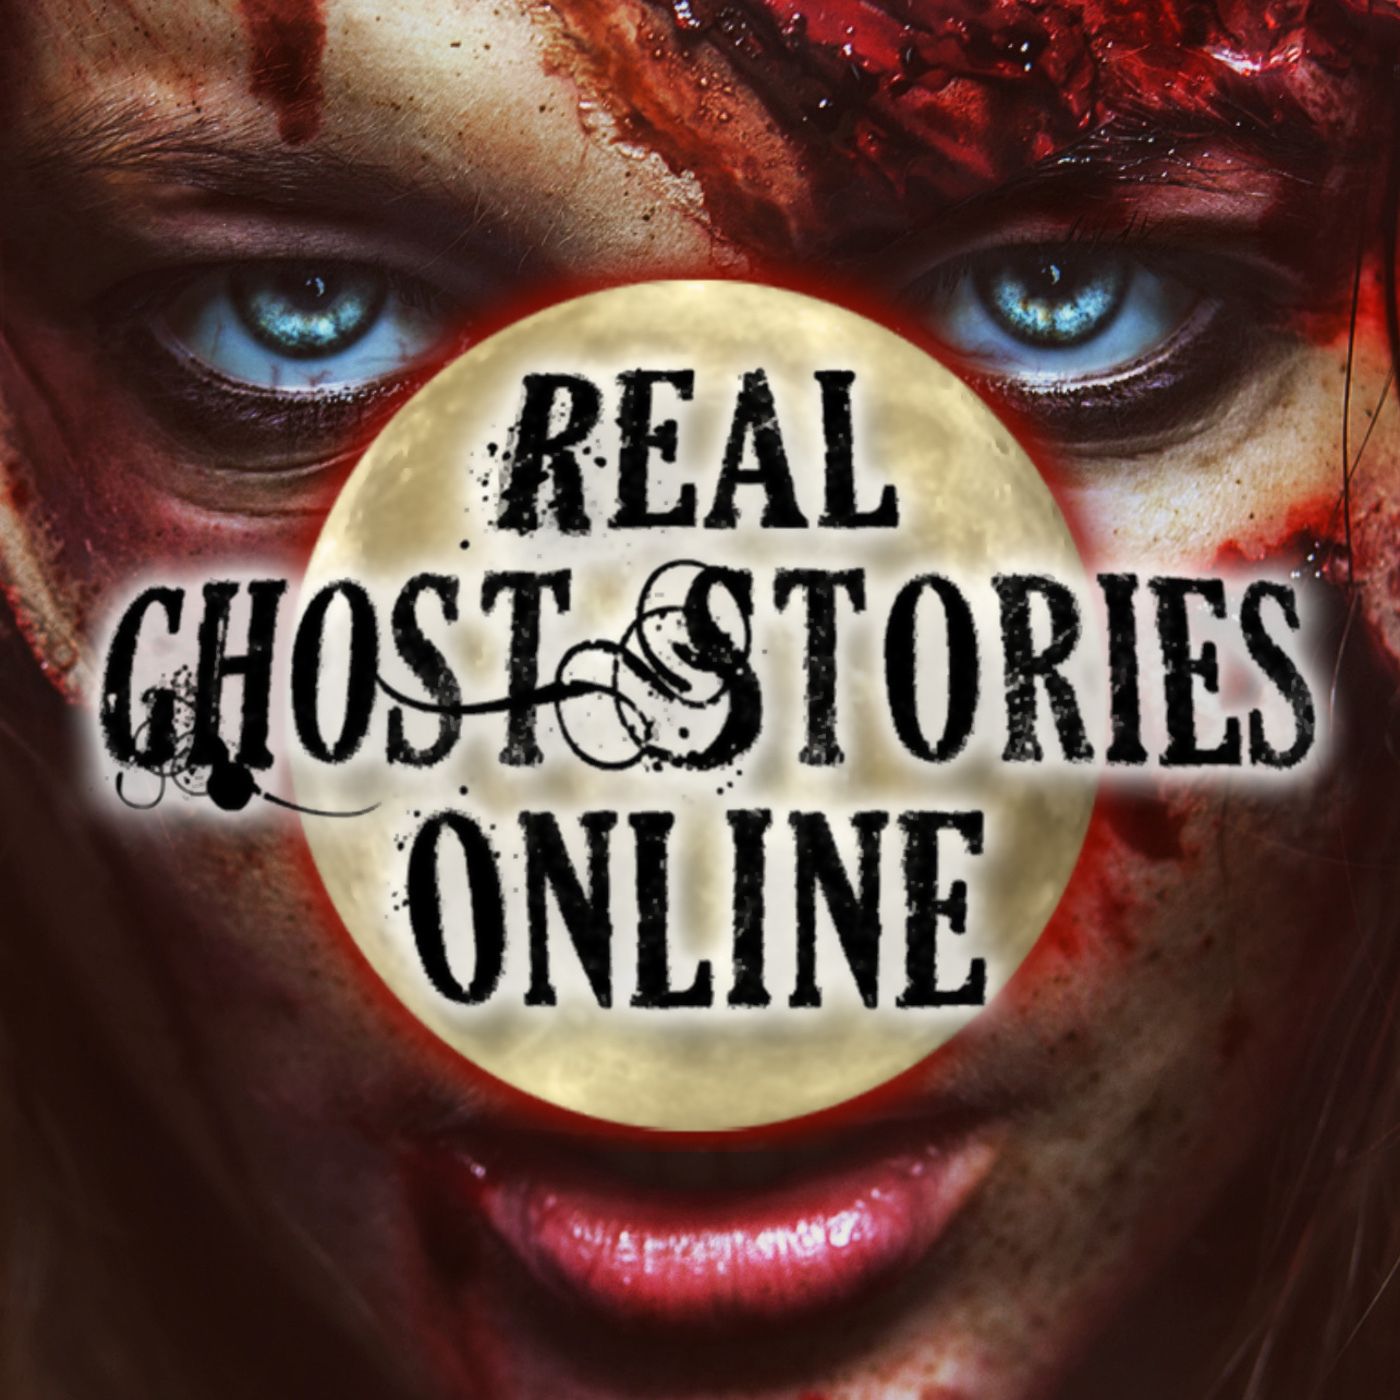 What Crawled in Bed? | Real Ghost Stories Online